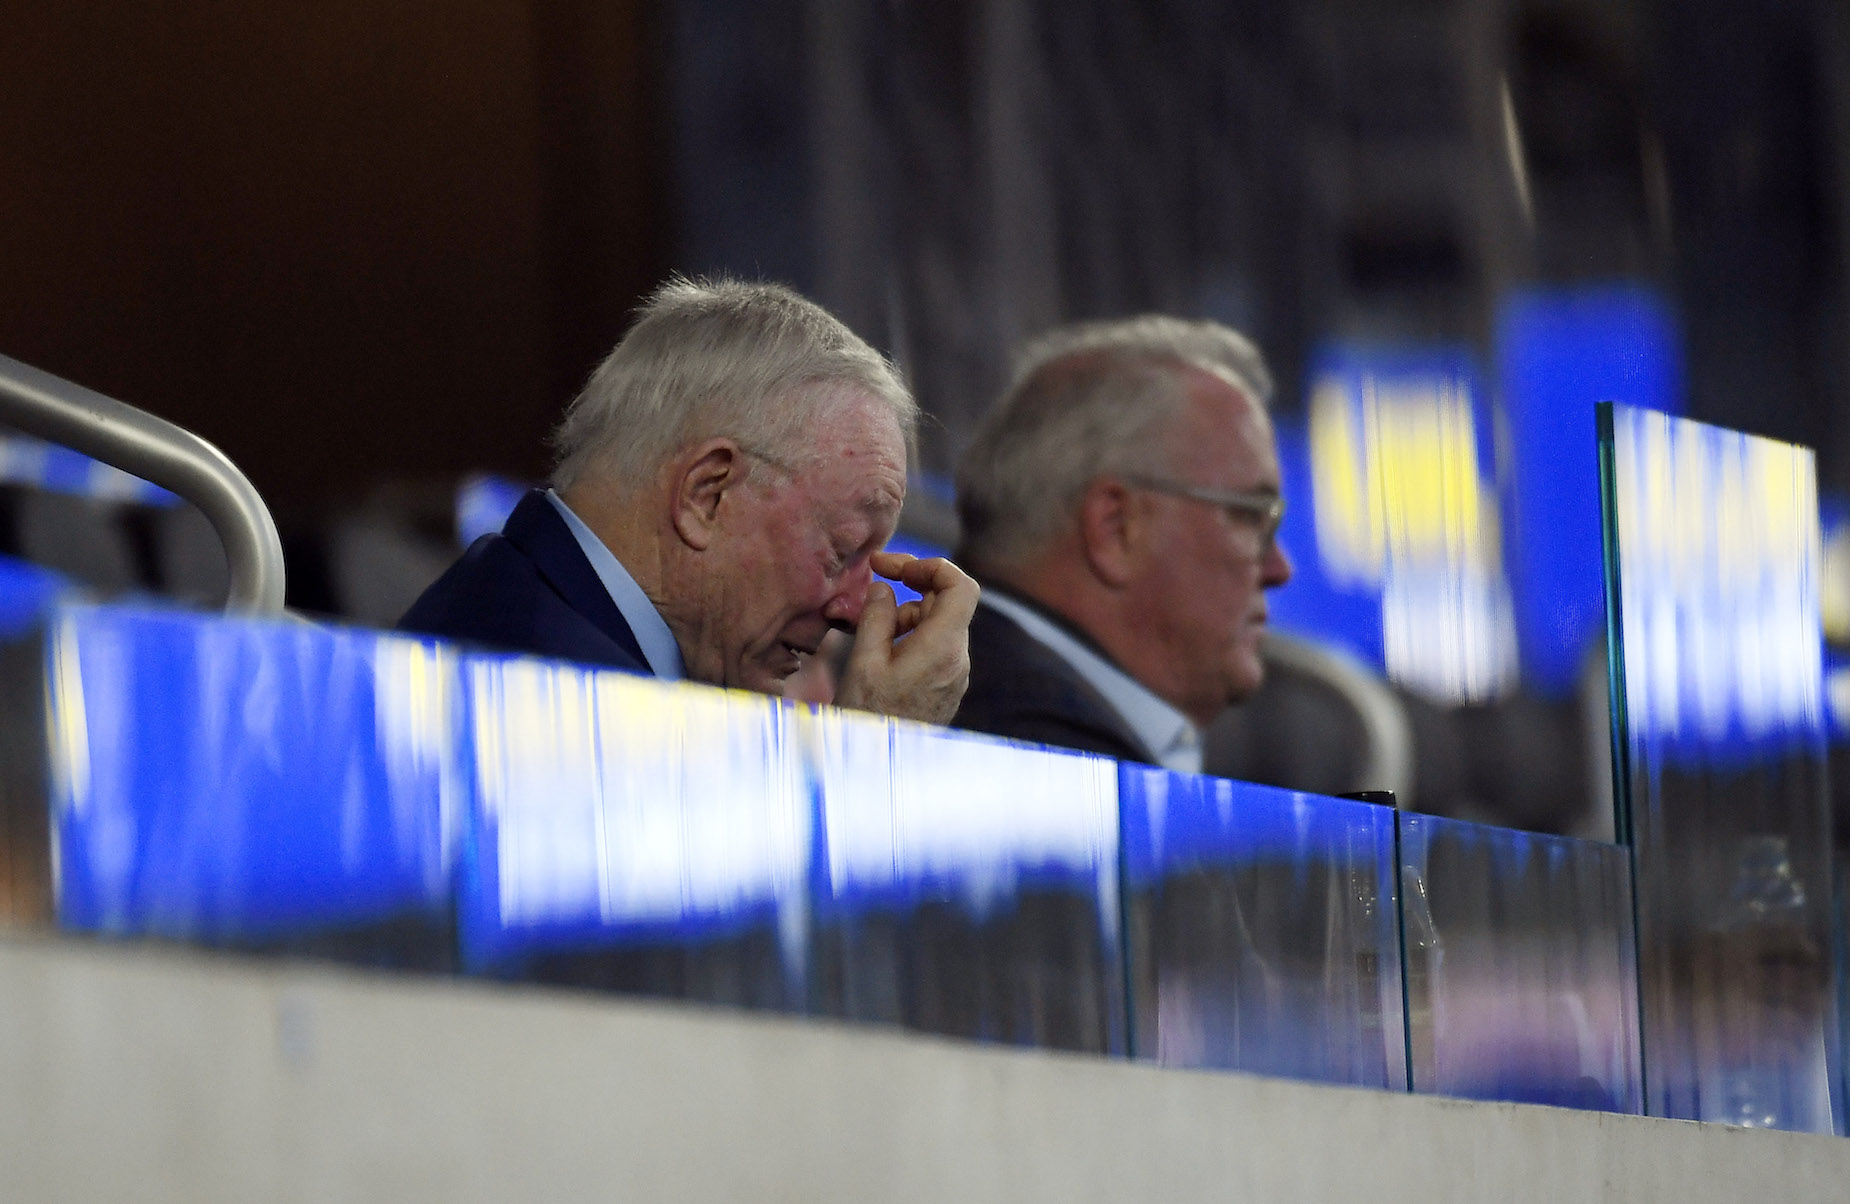 Jerry Jones might be dooming the Dallas Cowboys to another year of mediocrity with his inaction.